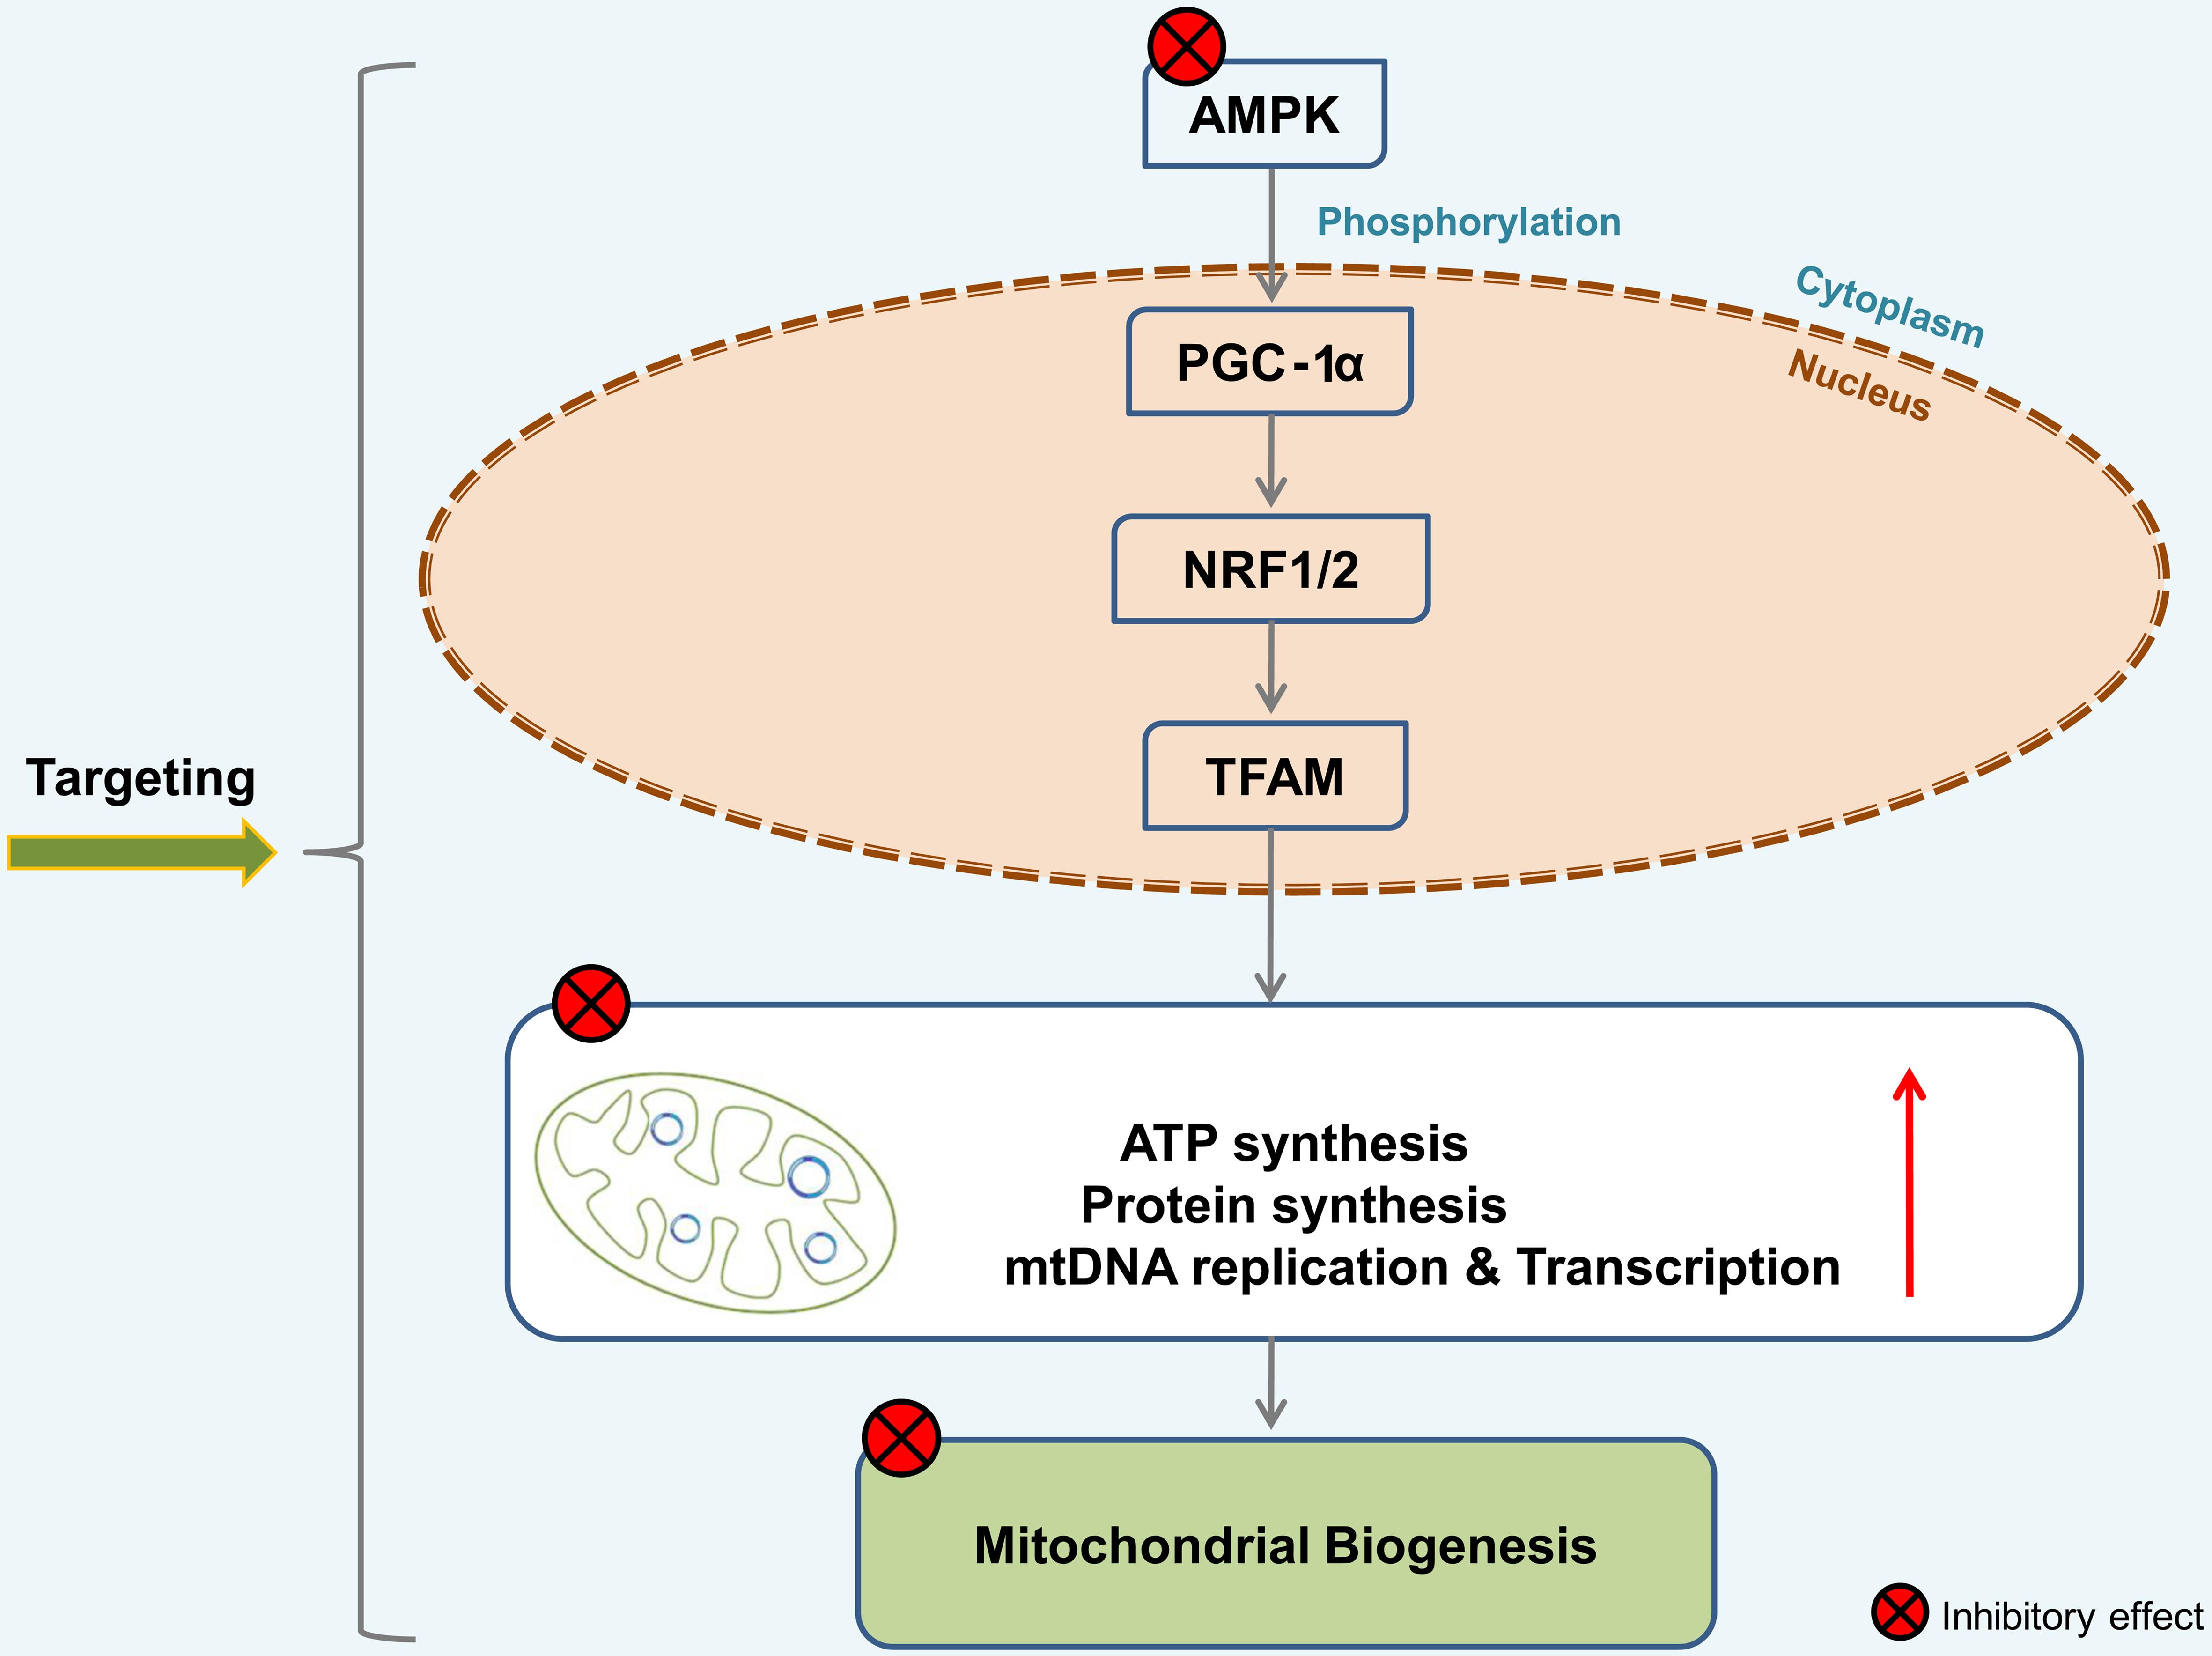 Schematic illustration of targeted proteins during de-regulated Mitochondrial Biogenesis.